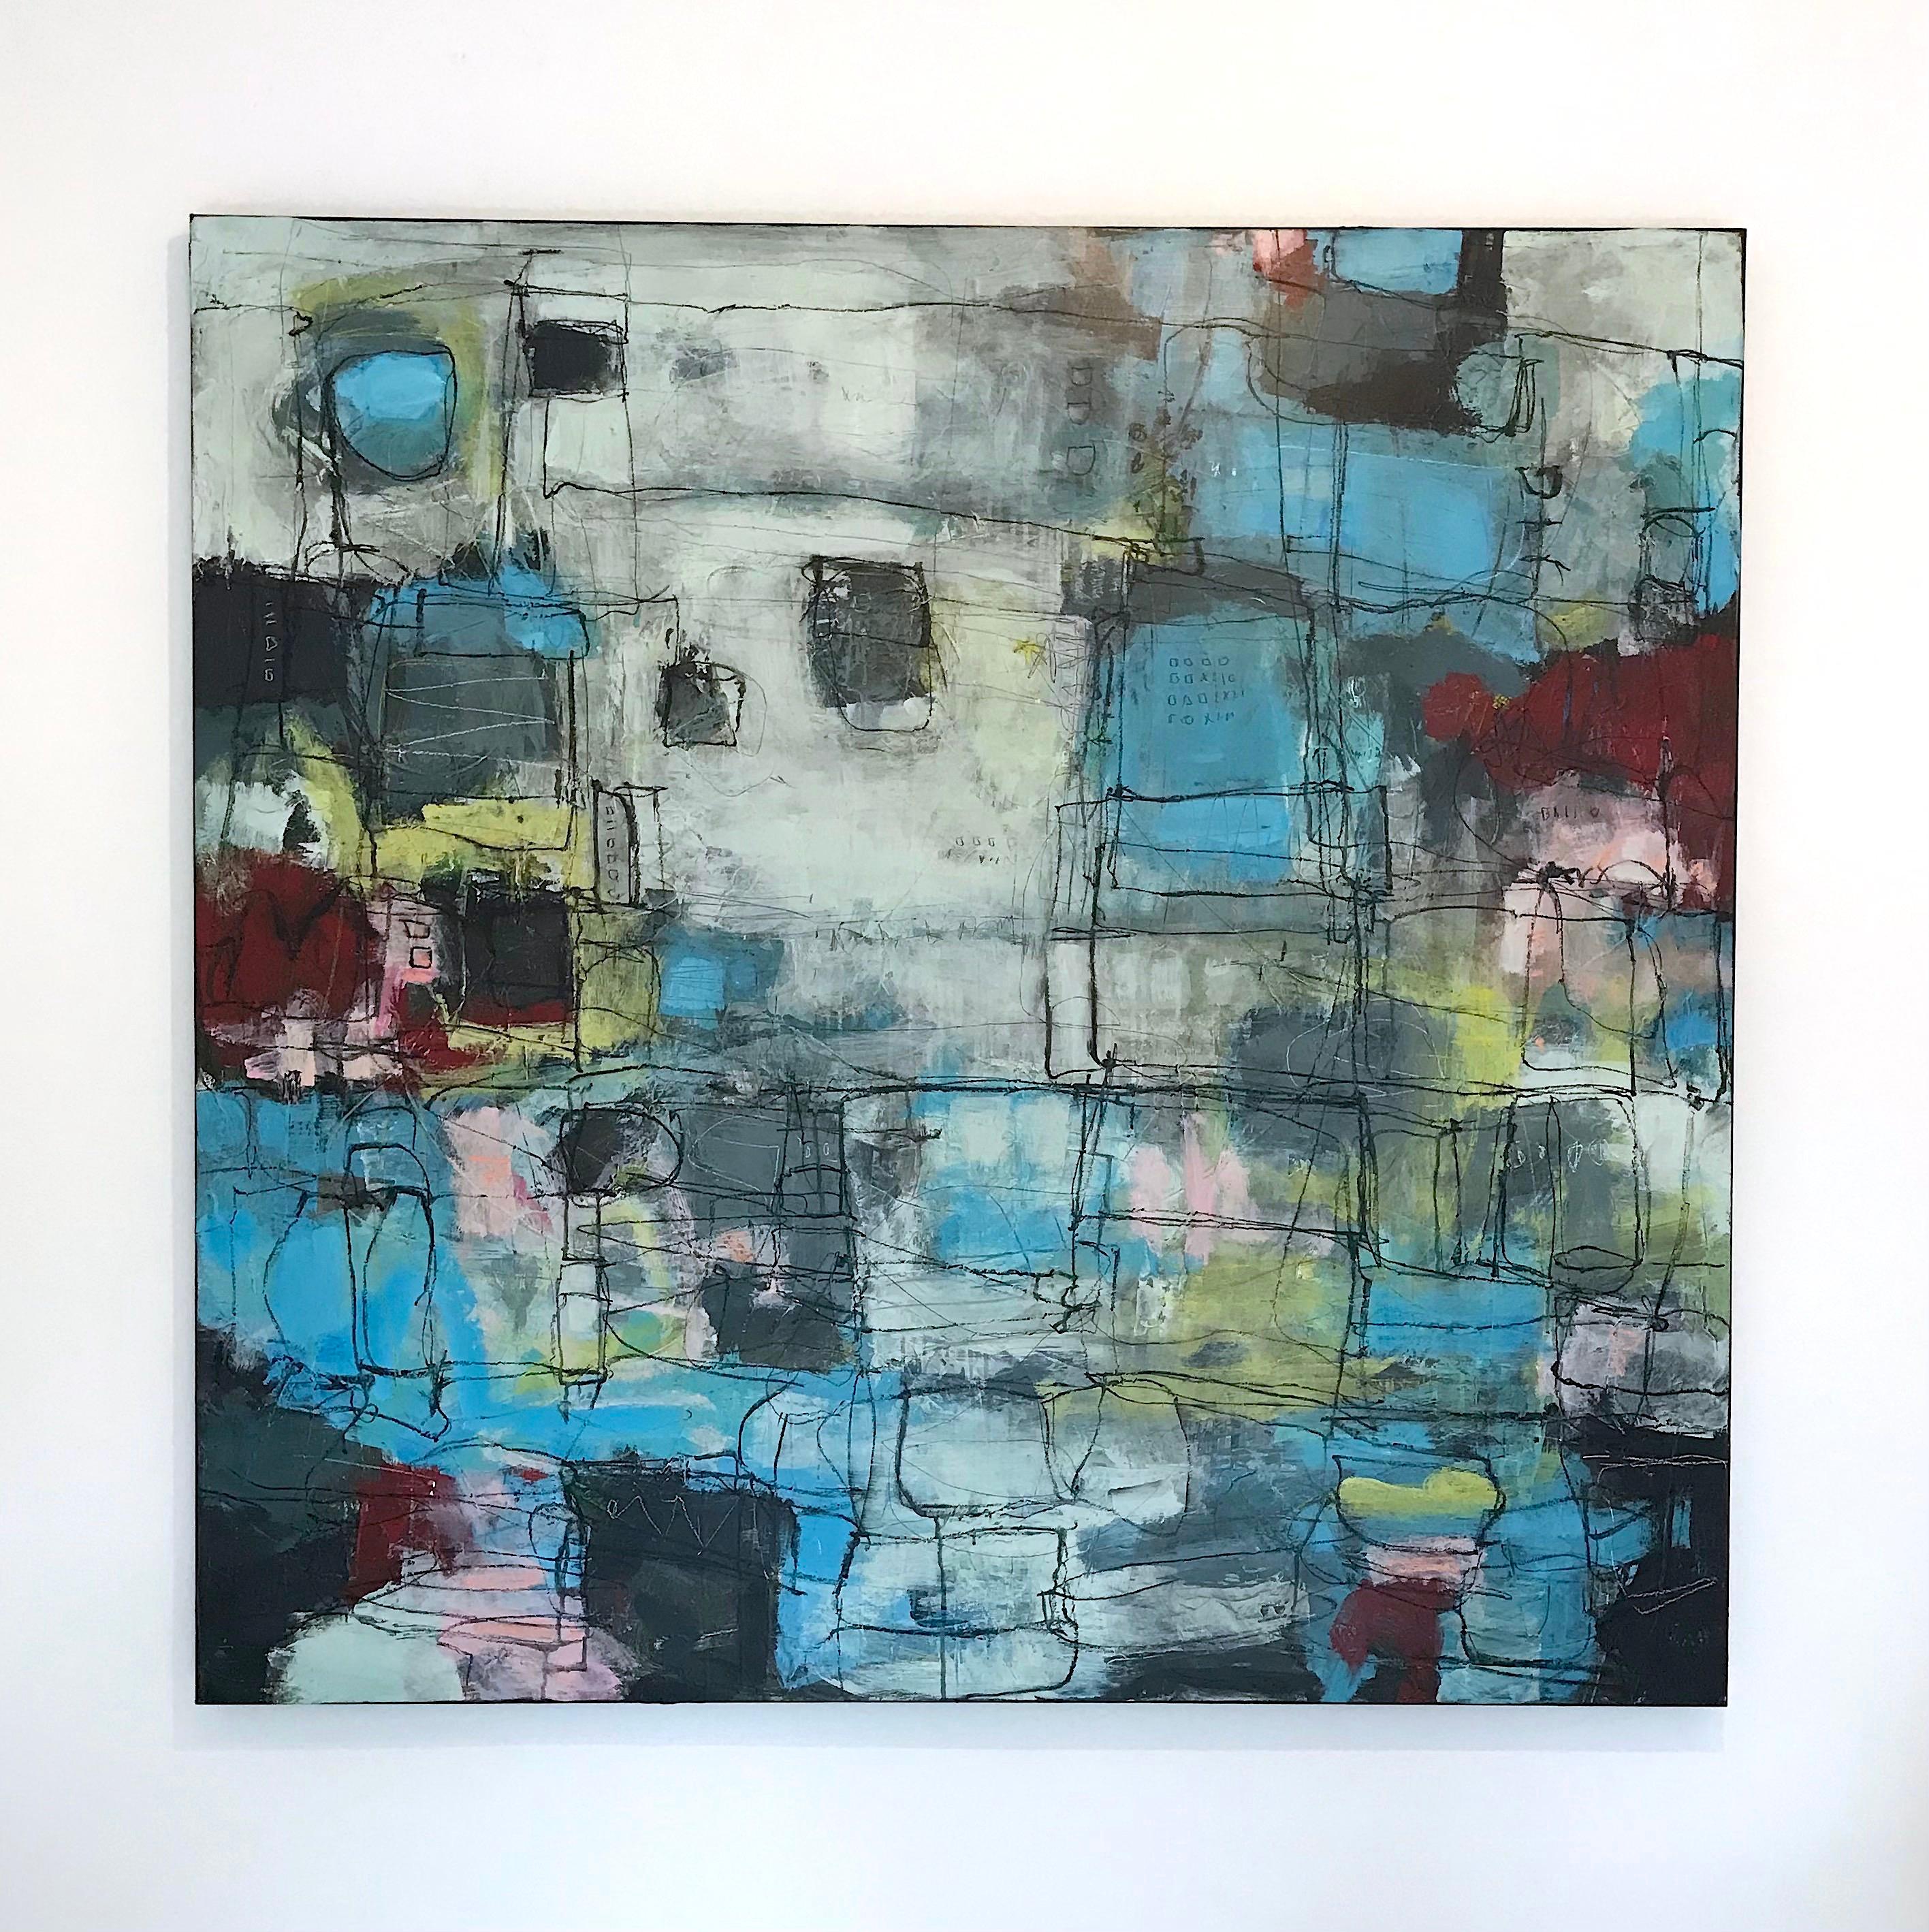 I Don't Quite Know -original abstract City landscape artwork contemporary modern - Painting by Lori Mirabelli 